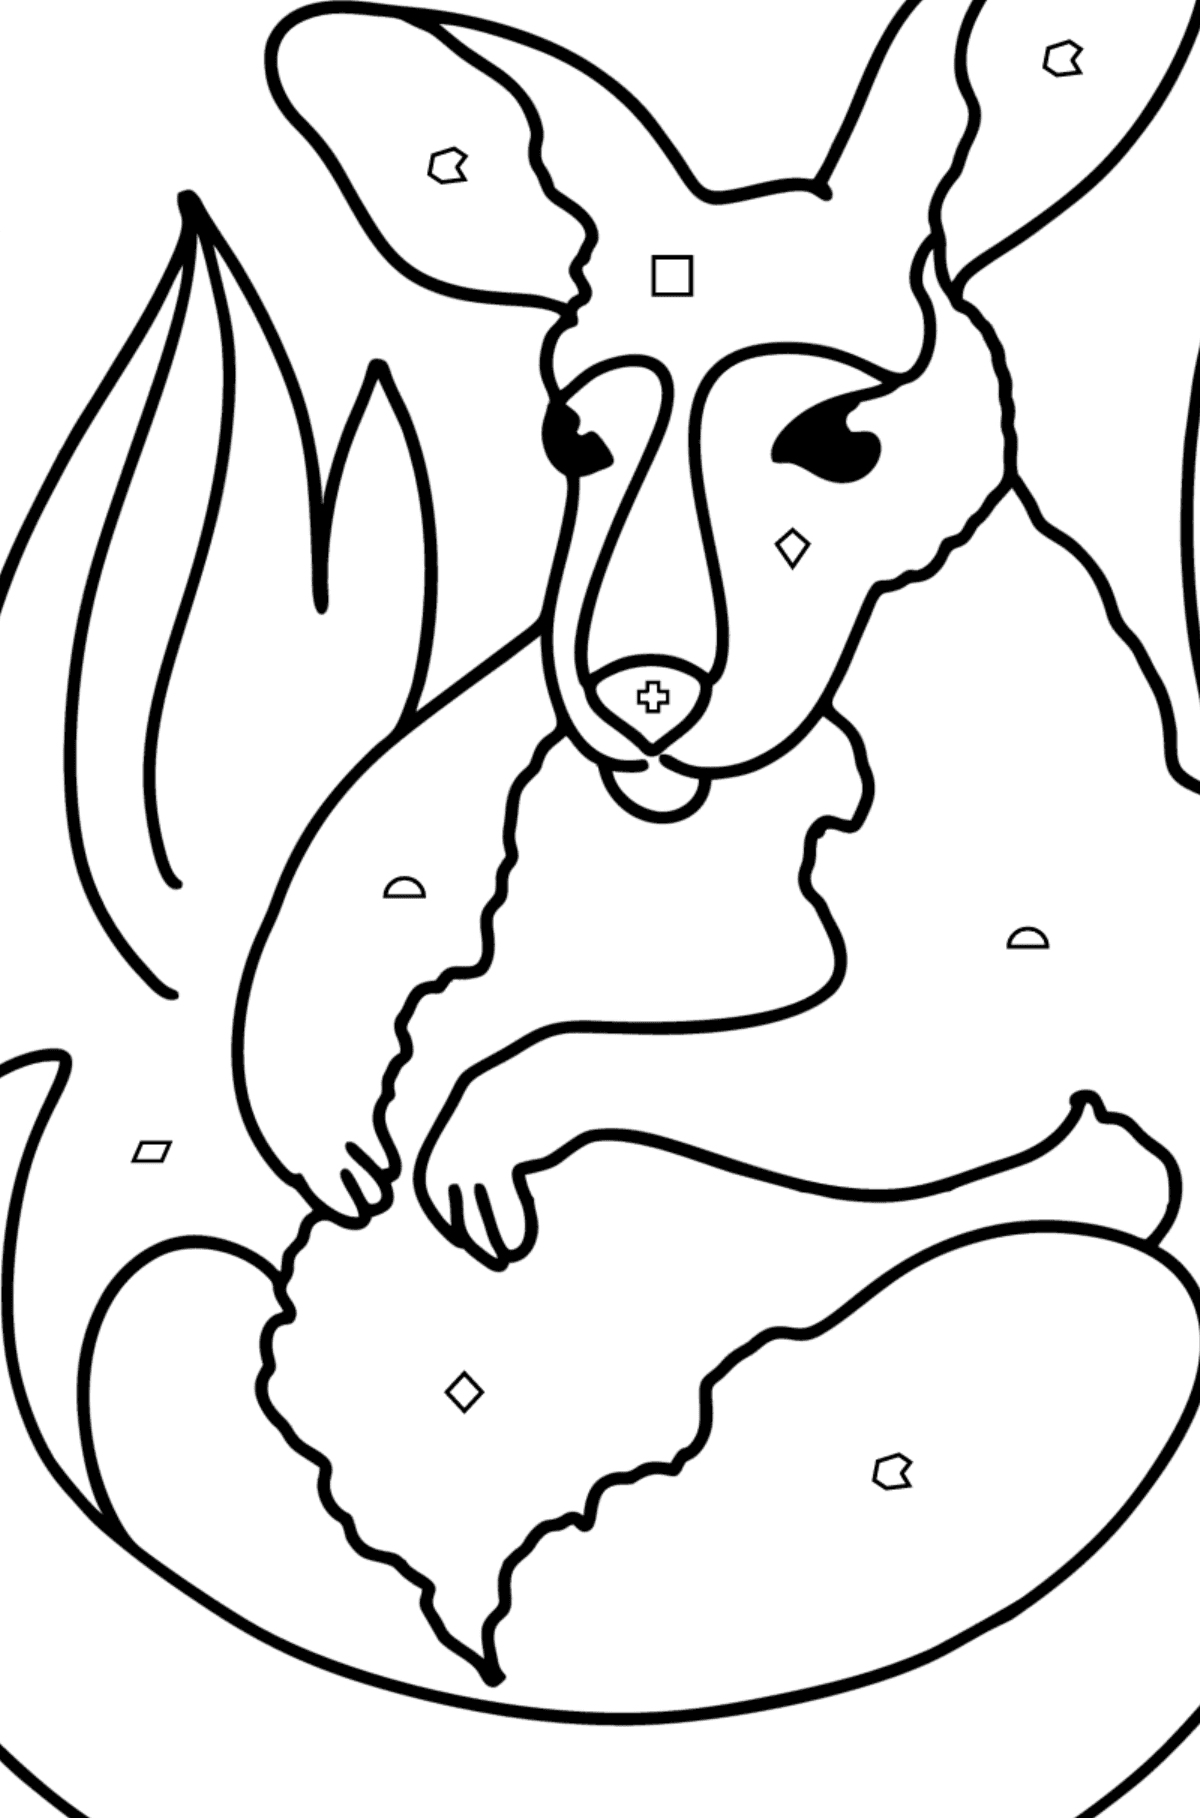 Coloring page - Adorable baby kangaroo - Coloring by Geometric Shapes for Kids